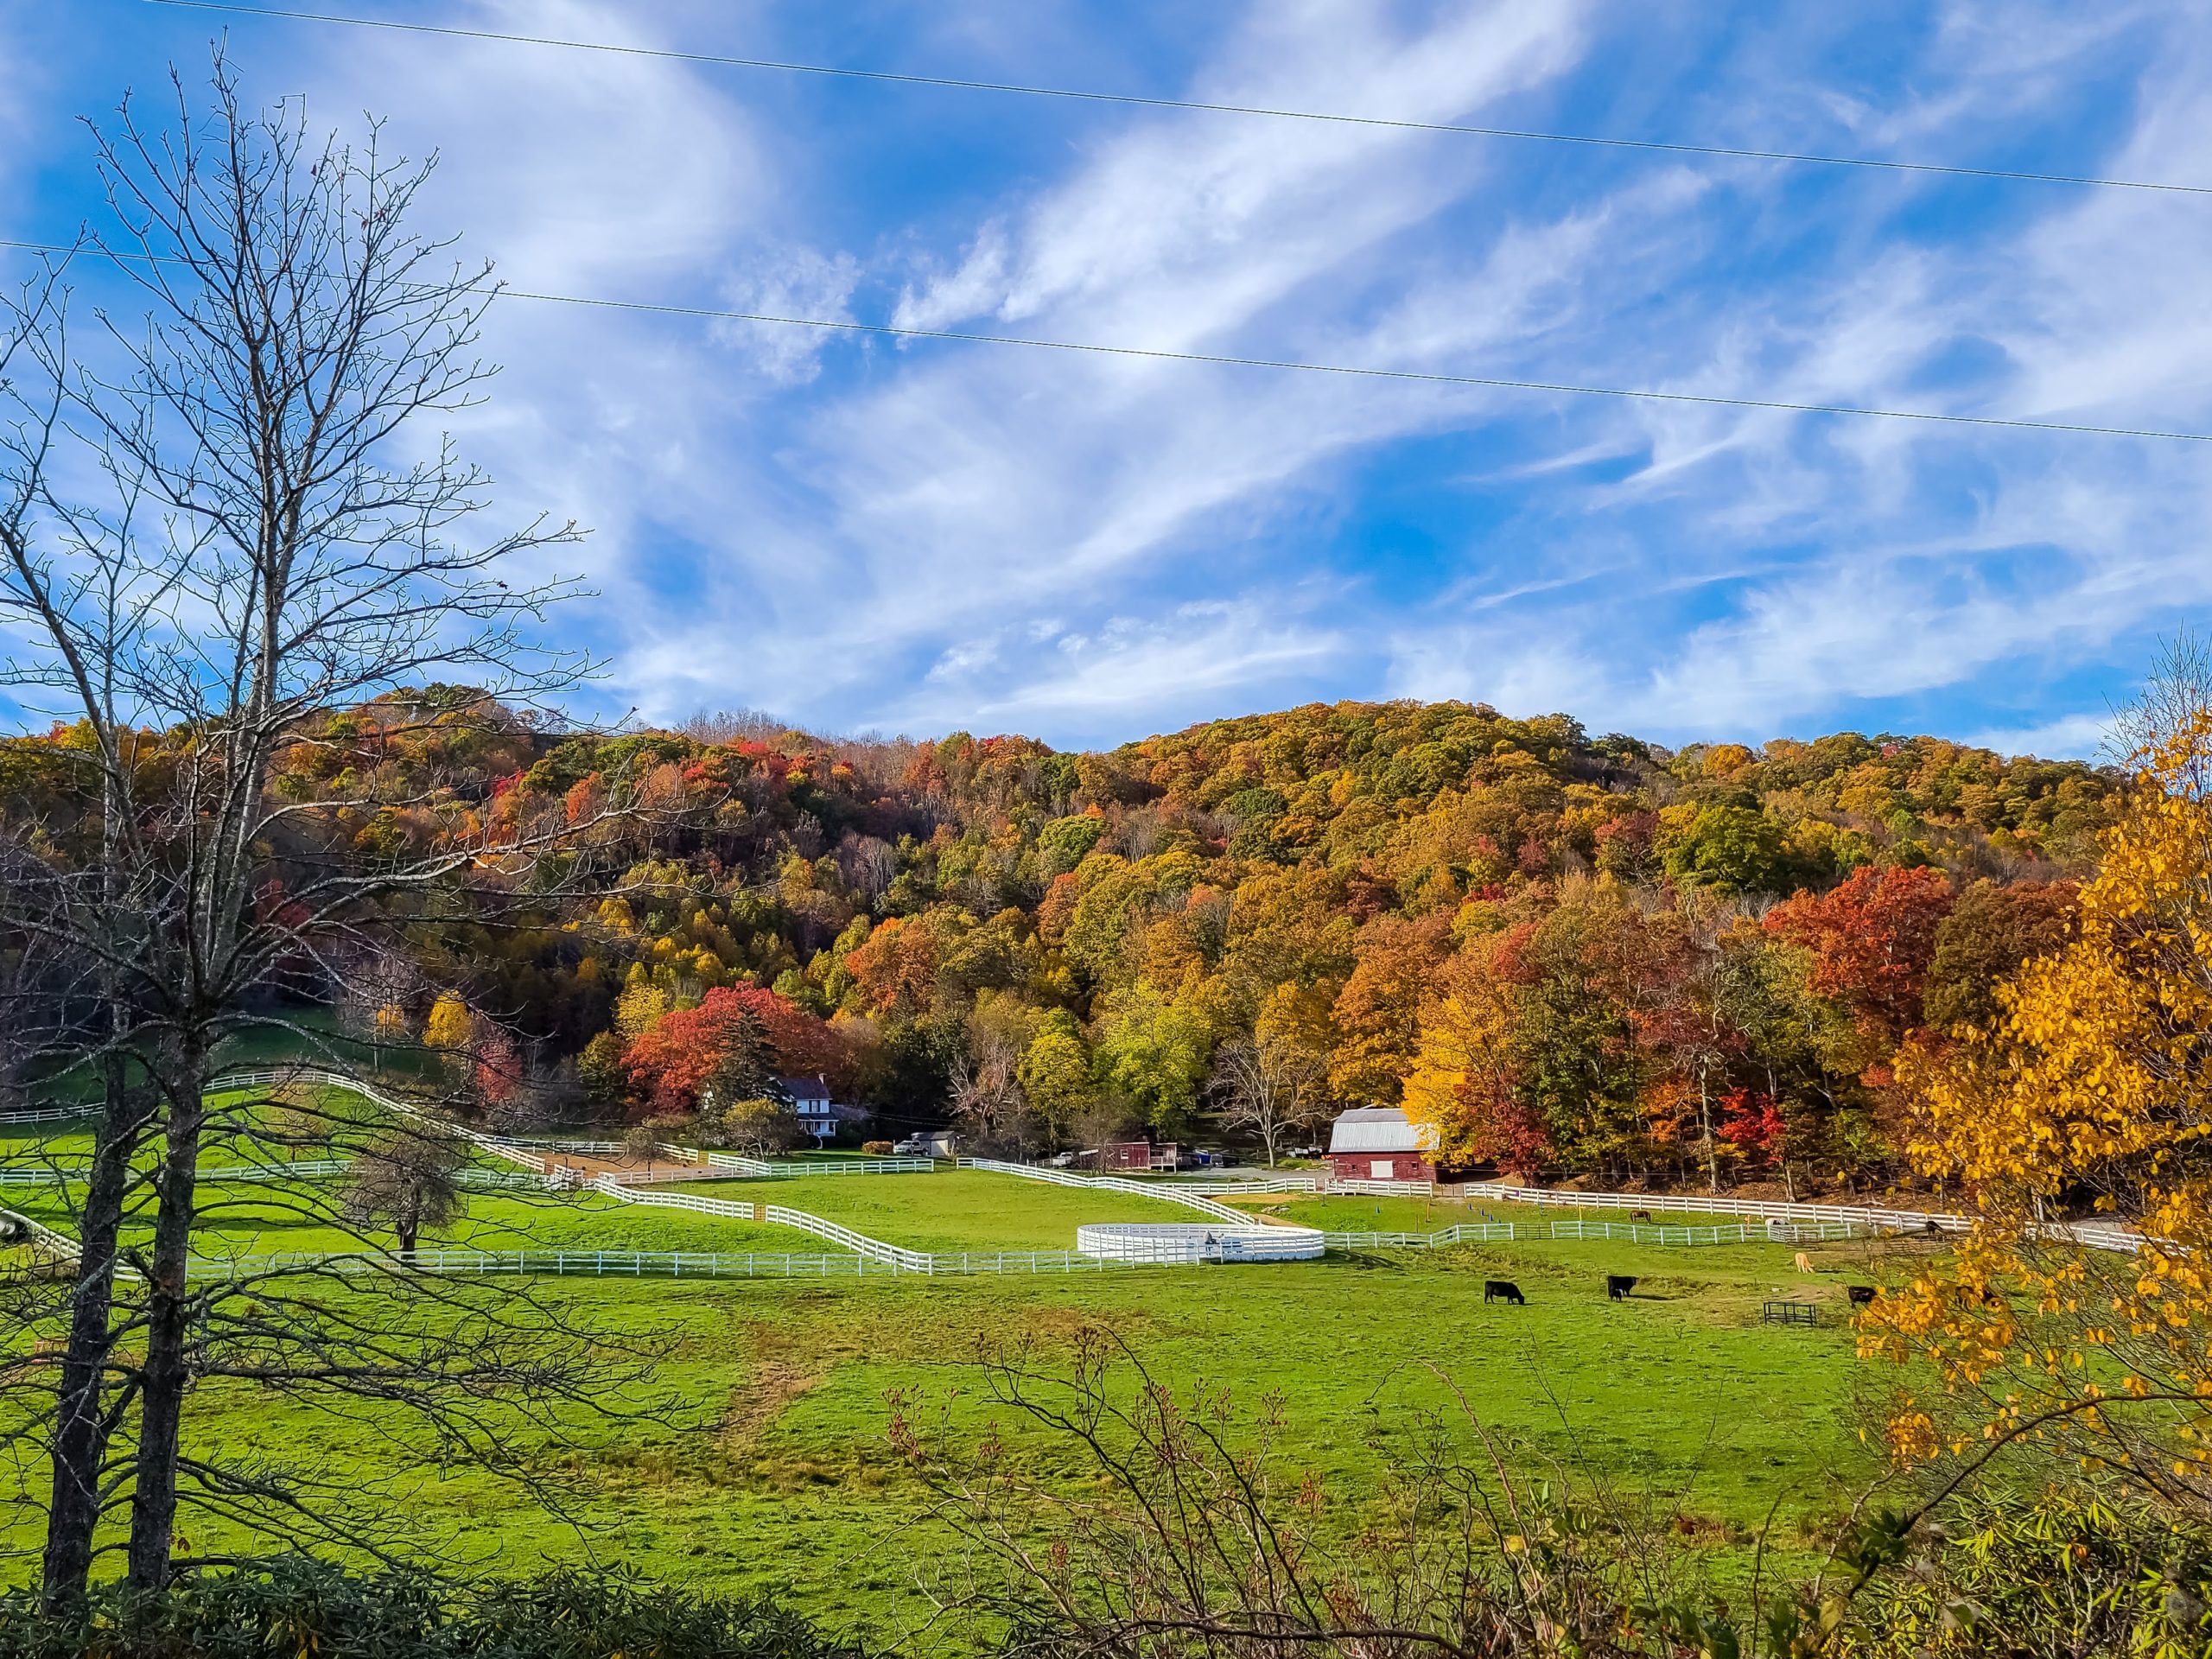 The Best Places to Experience Fall Colors in North Carolina